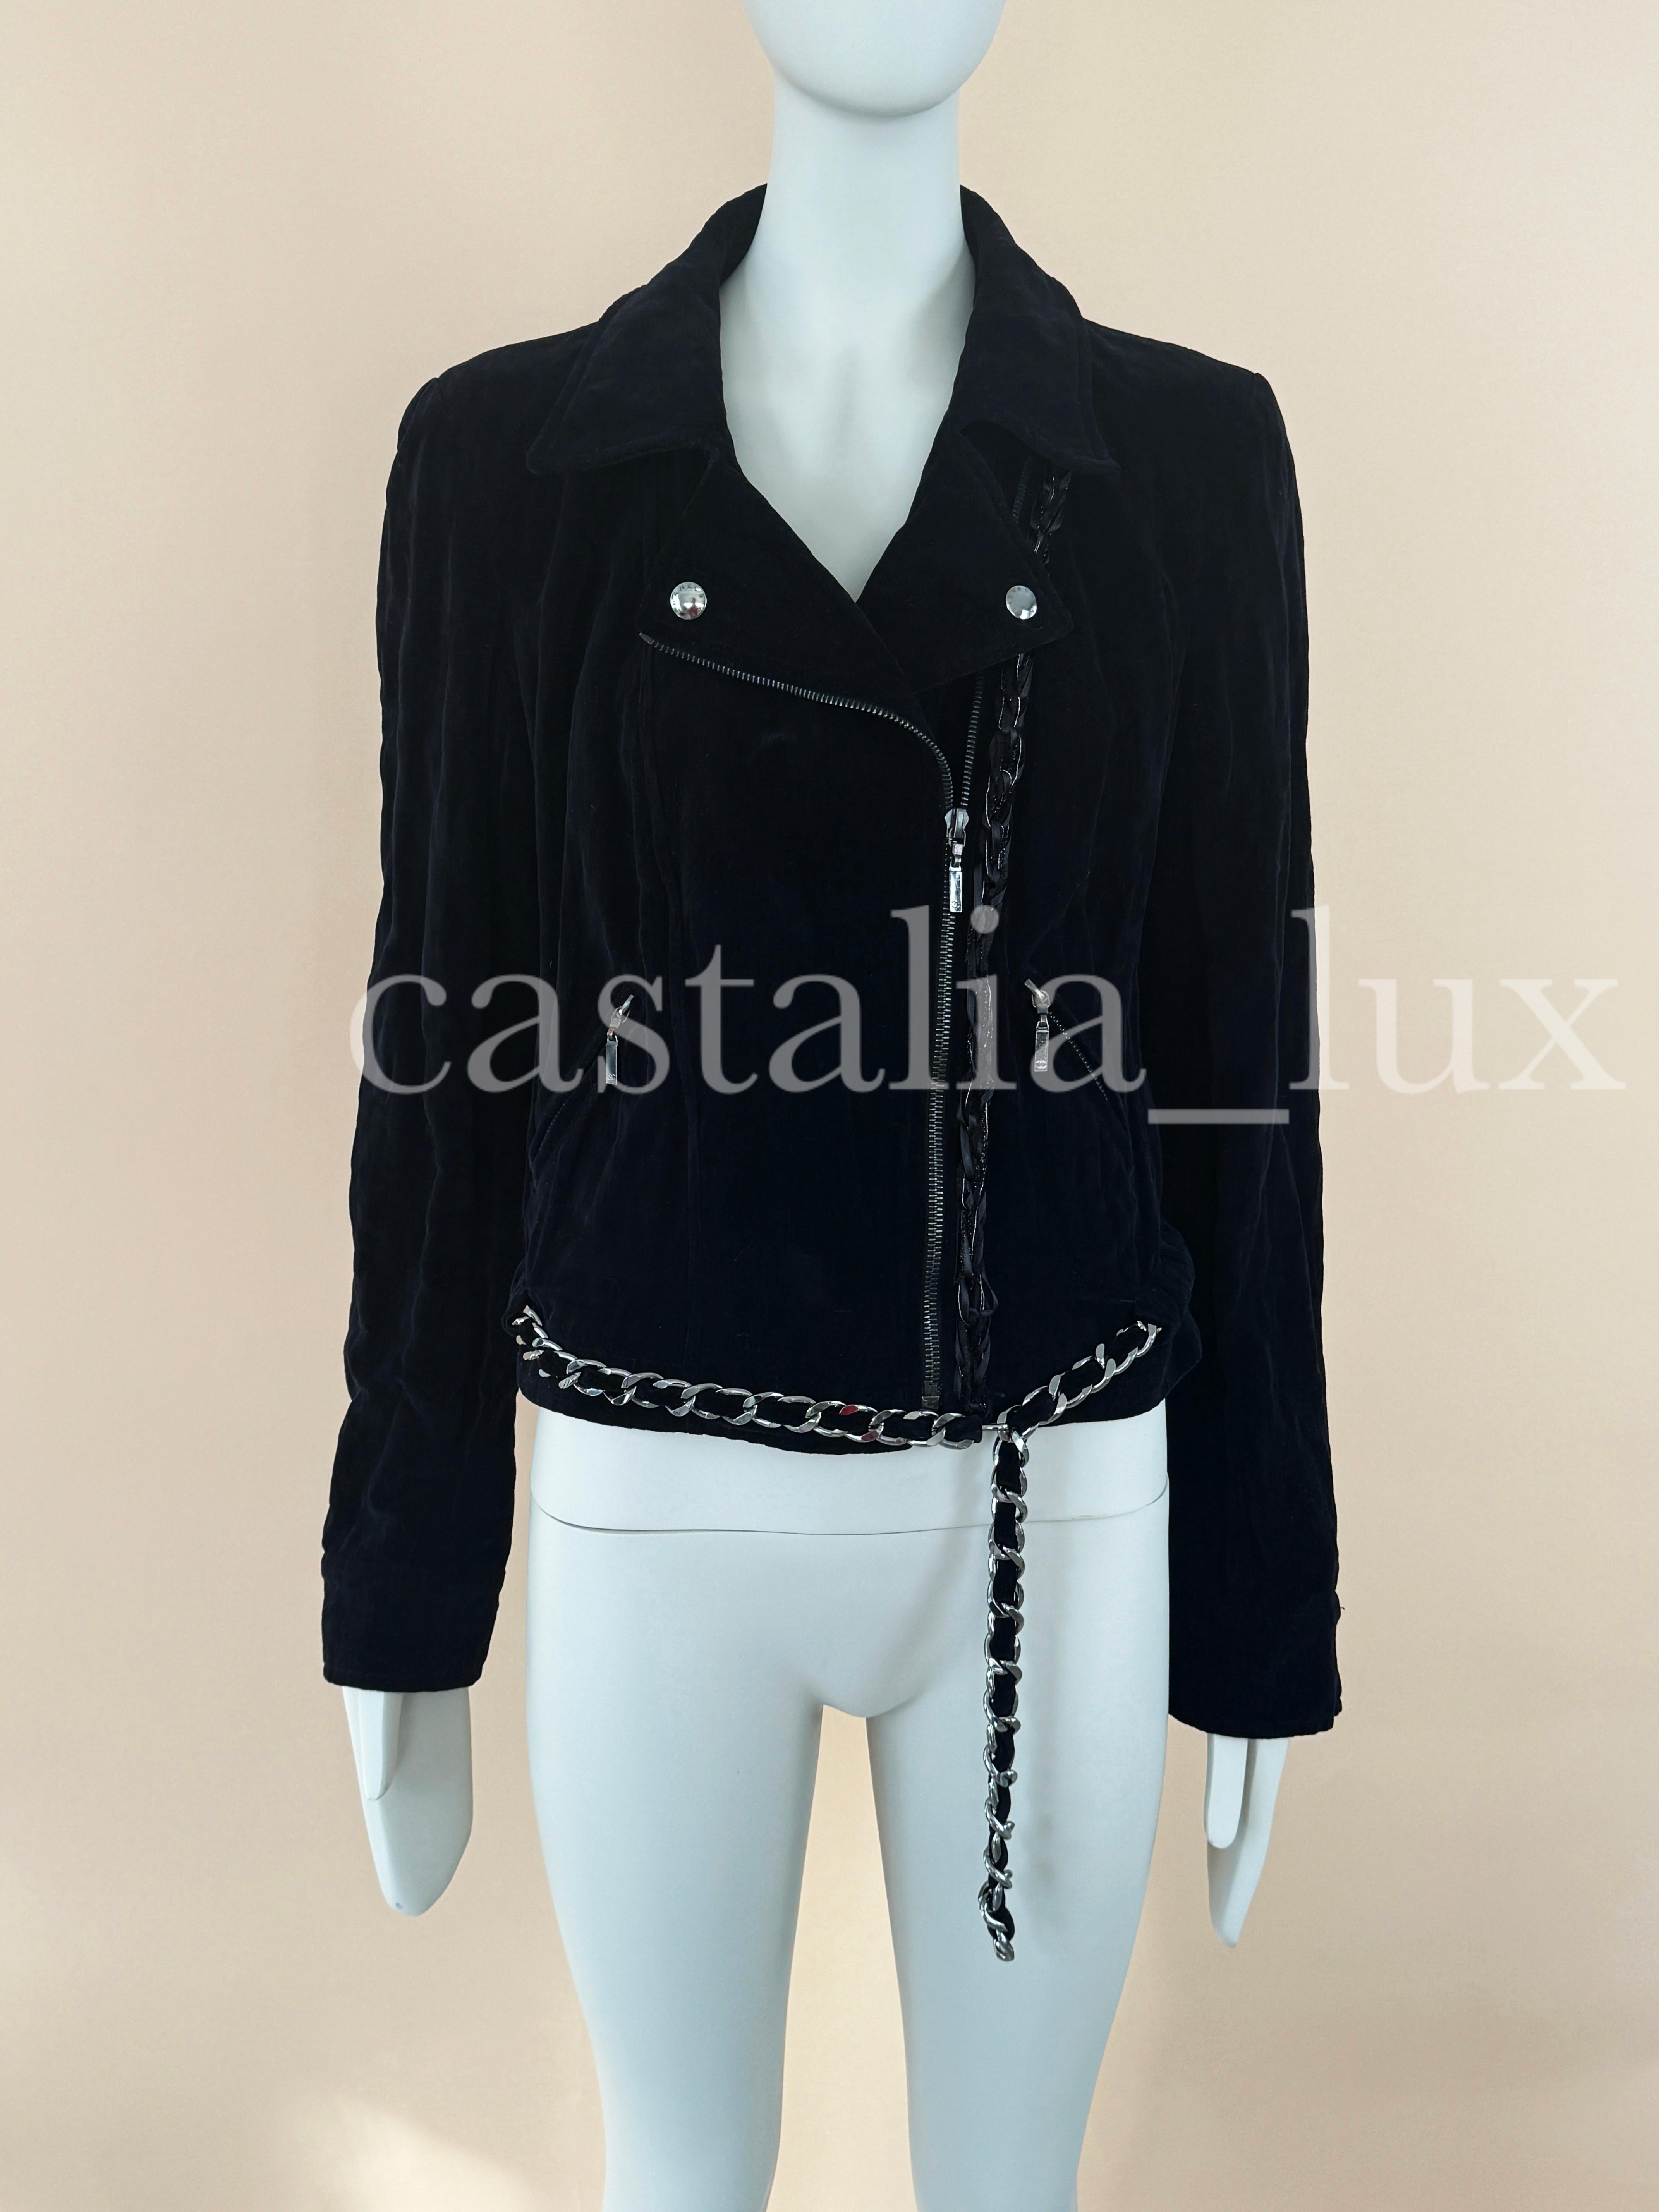 Collectible Chanel black velvet biker jacket with signature metallic chain link trim at hem!
A very rare find now!
- logo buttons at front and cuffs
- braided detail at side
Size mark 40 FR. Kept unworn.